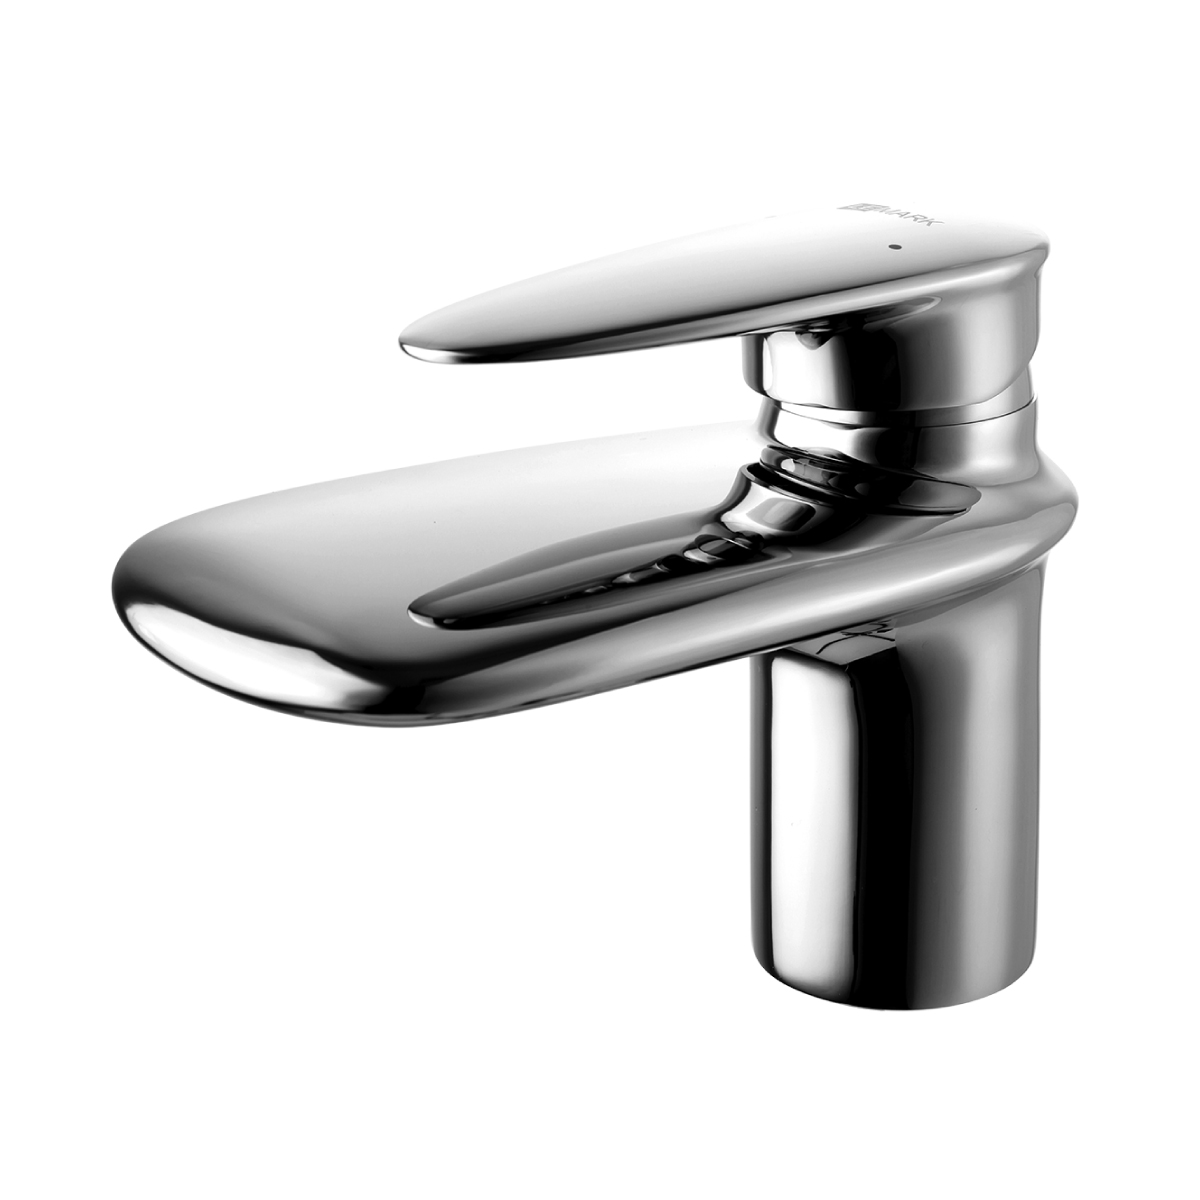 LM4446C Washbasin faucet
with waterfall spout